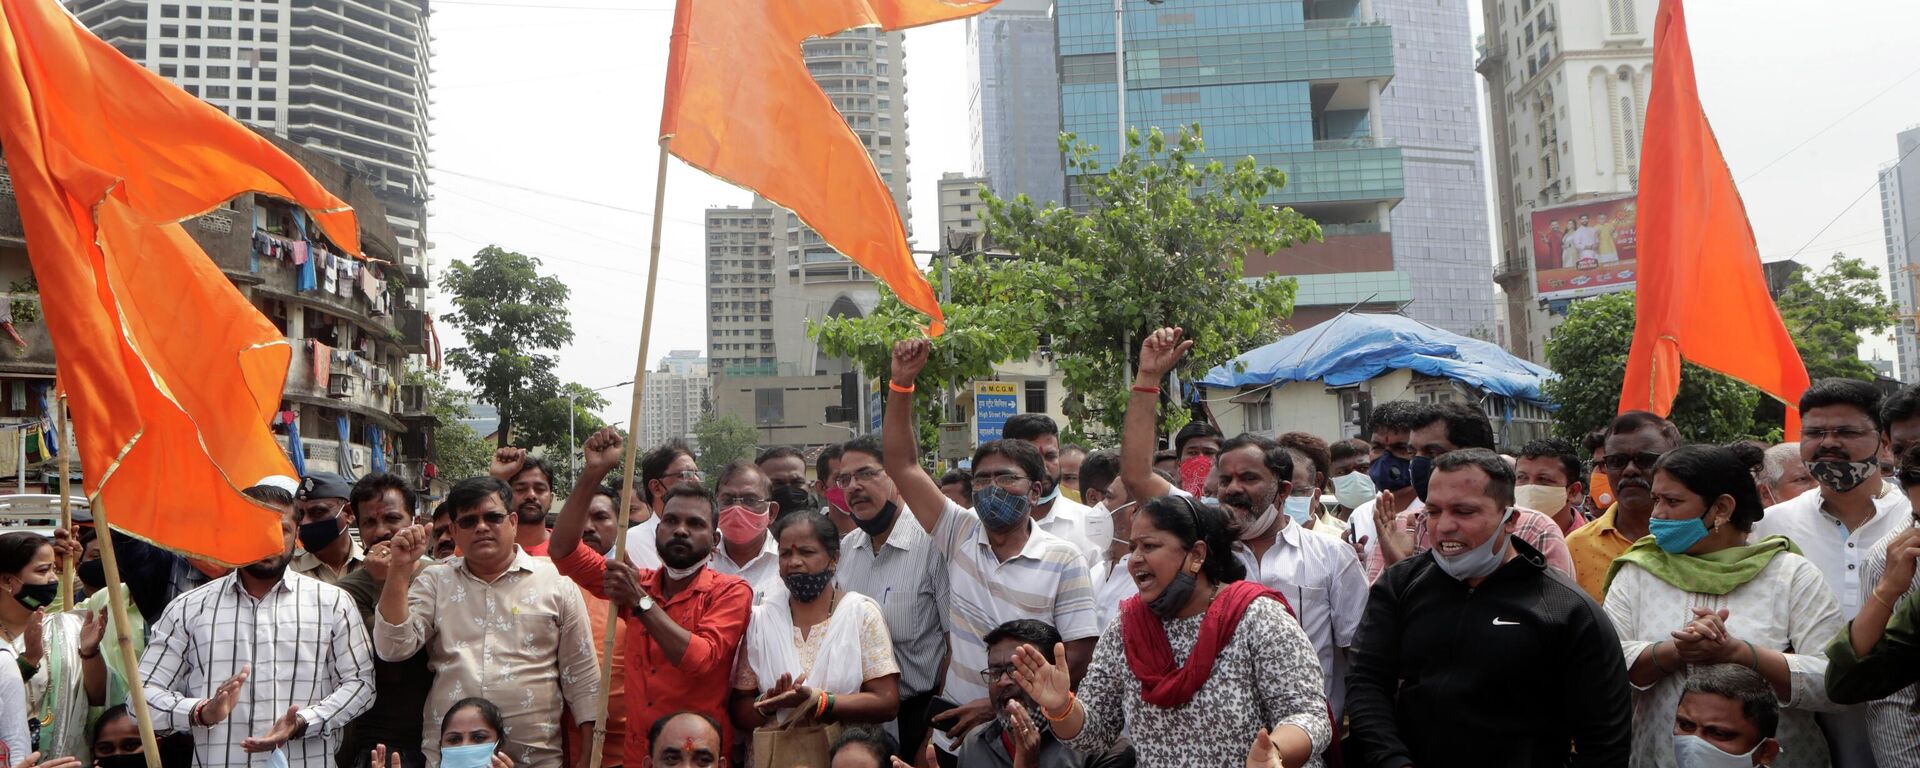 Shiv Sena party workers shout slogans during a state-wide strike in Maharashtra against last week’s violence in Uttar Pradesh state in Mumbai, India, Monday, Oct. 11, 2021. Four farmers died last week when a car owned a junior minister in Prime Minister Narendra Modi’s government ran over a group of protesting farmers in Lakhimpur Kheri, a town in Uttar Pradesh state. - Sputnik International, 1920, 21.06.2022